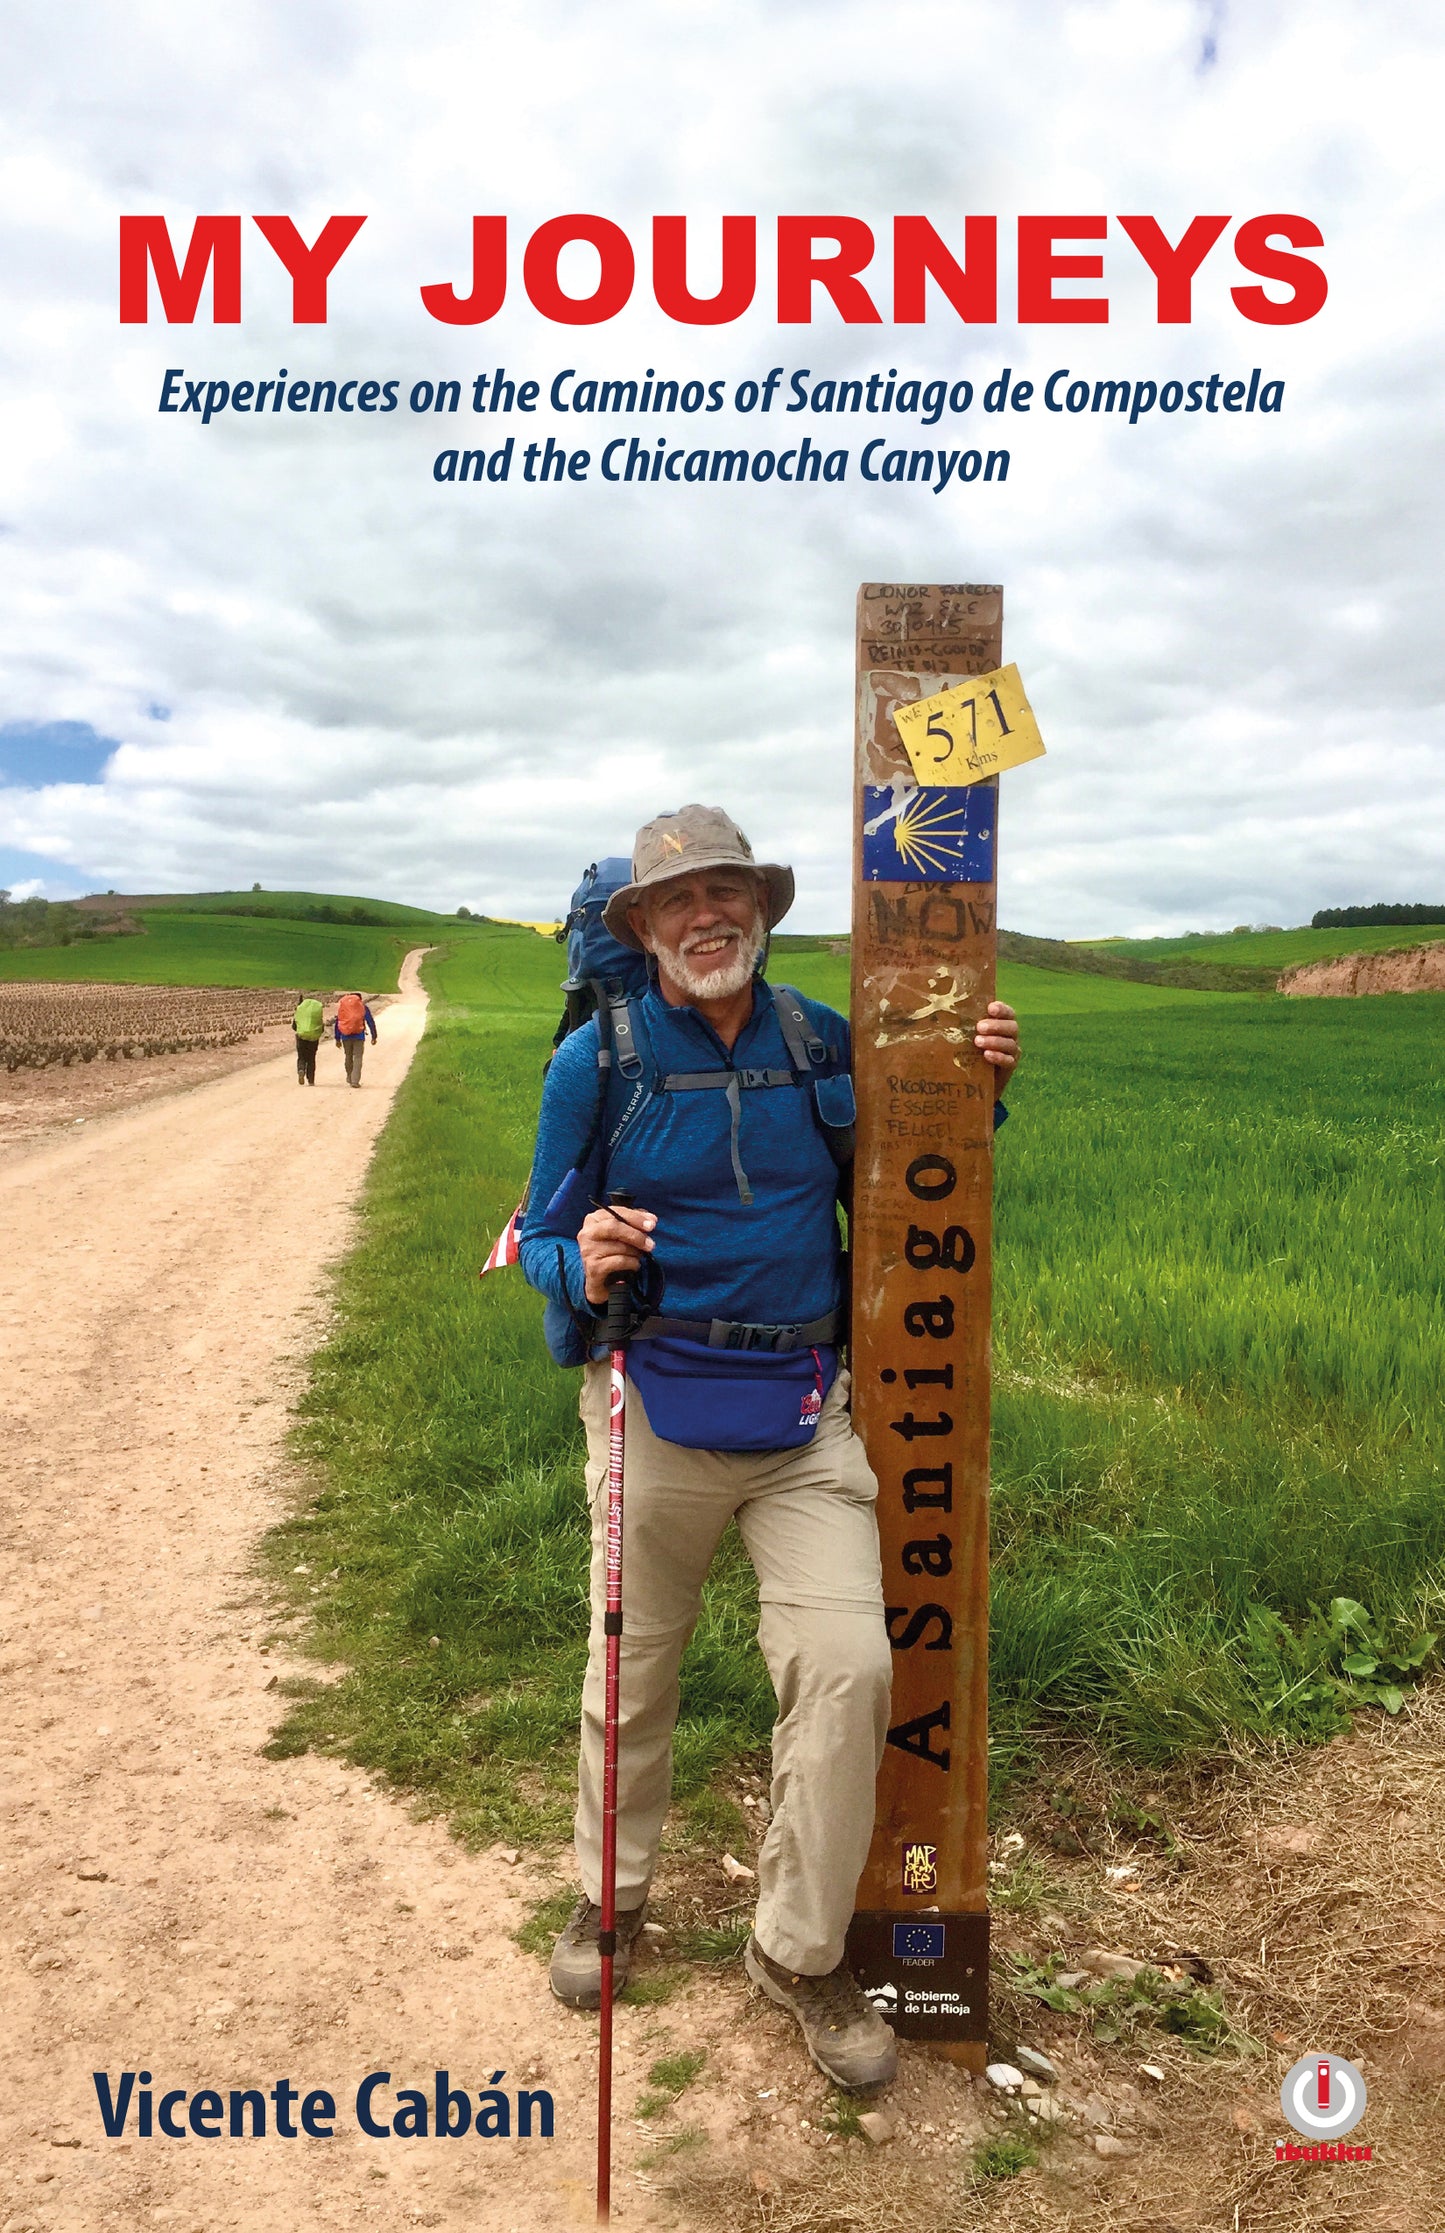 My Journeys: Experiences on the Caminos of Santiago de Compostela and the Chicamocha Canyon